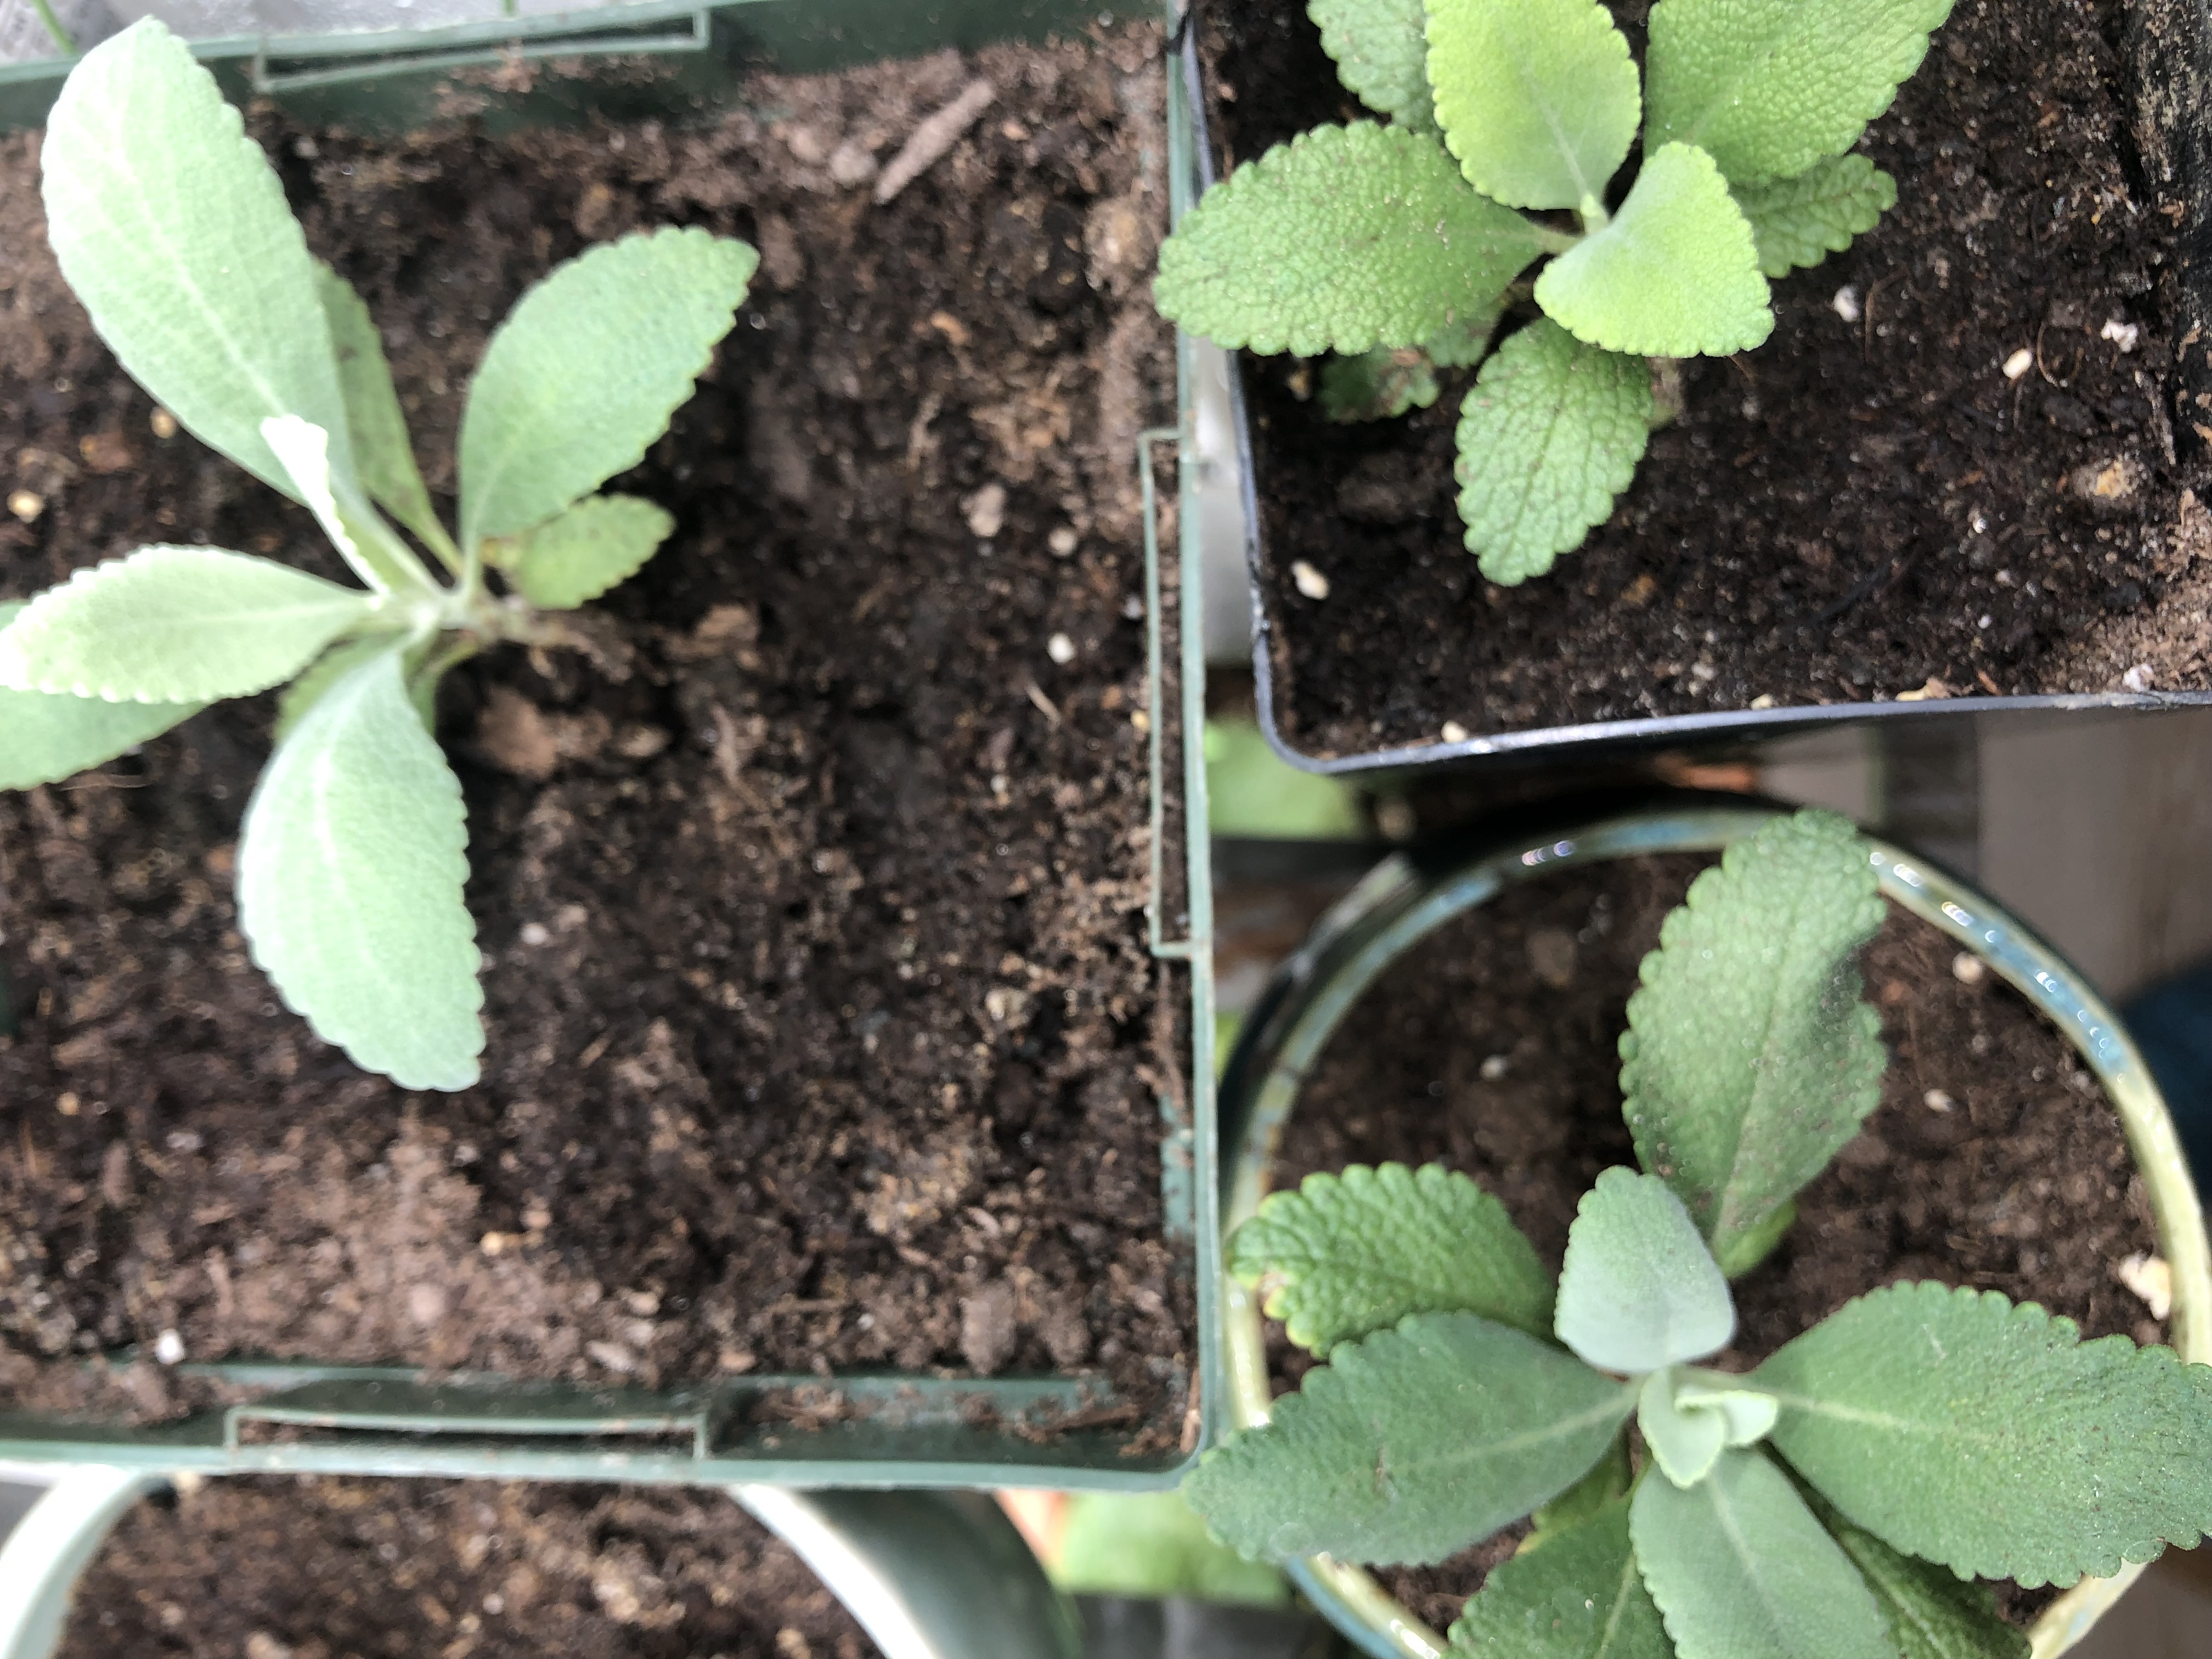 White sage seedlings growing under grow lights in containers.